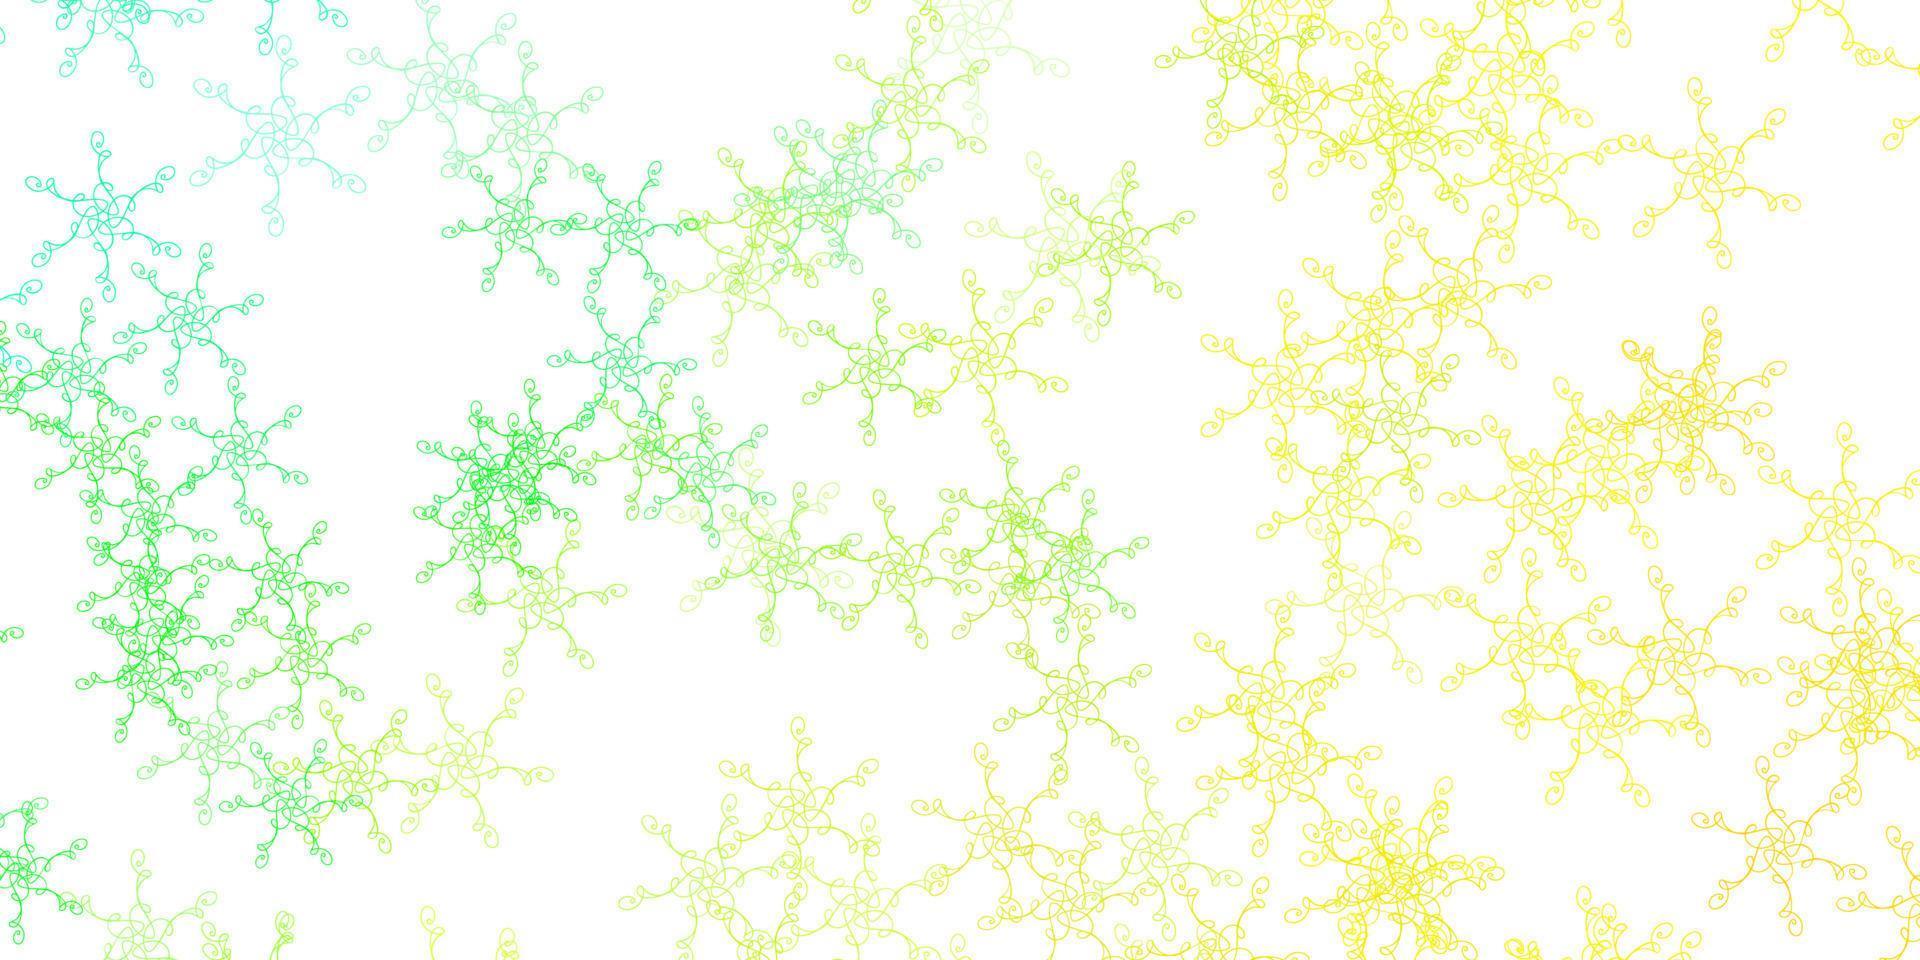 Light Green, Yellow vector layout with curves.